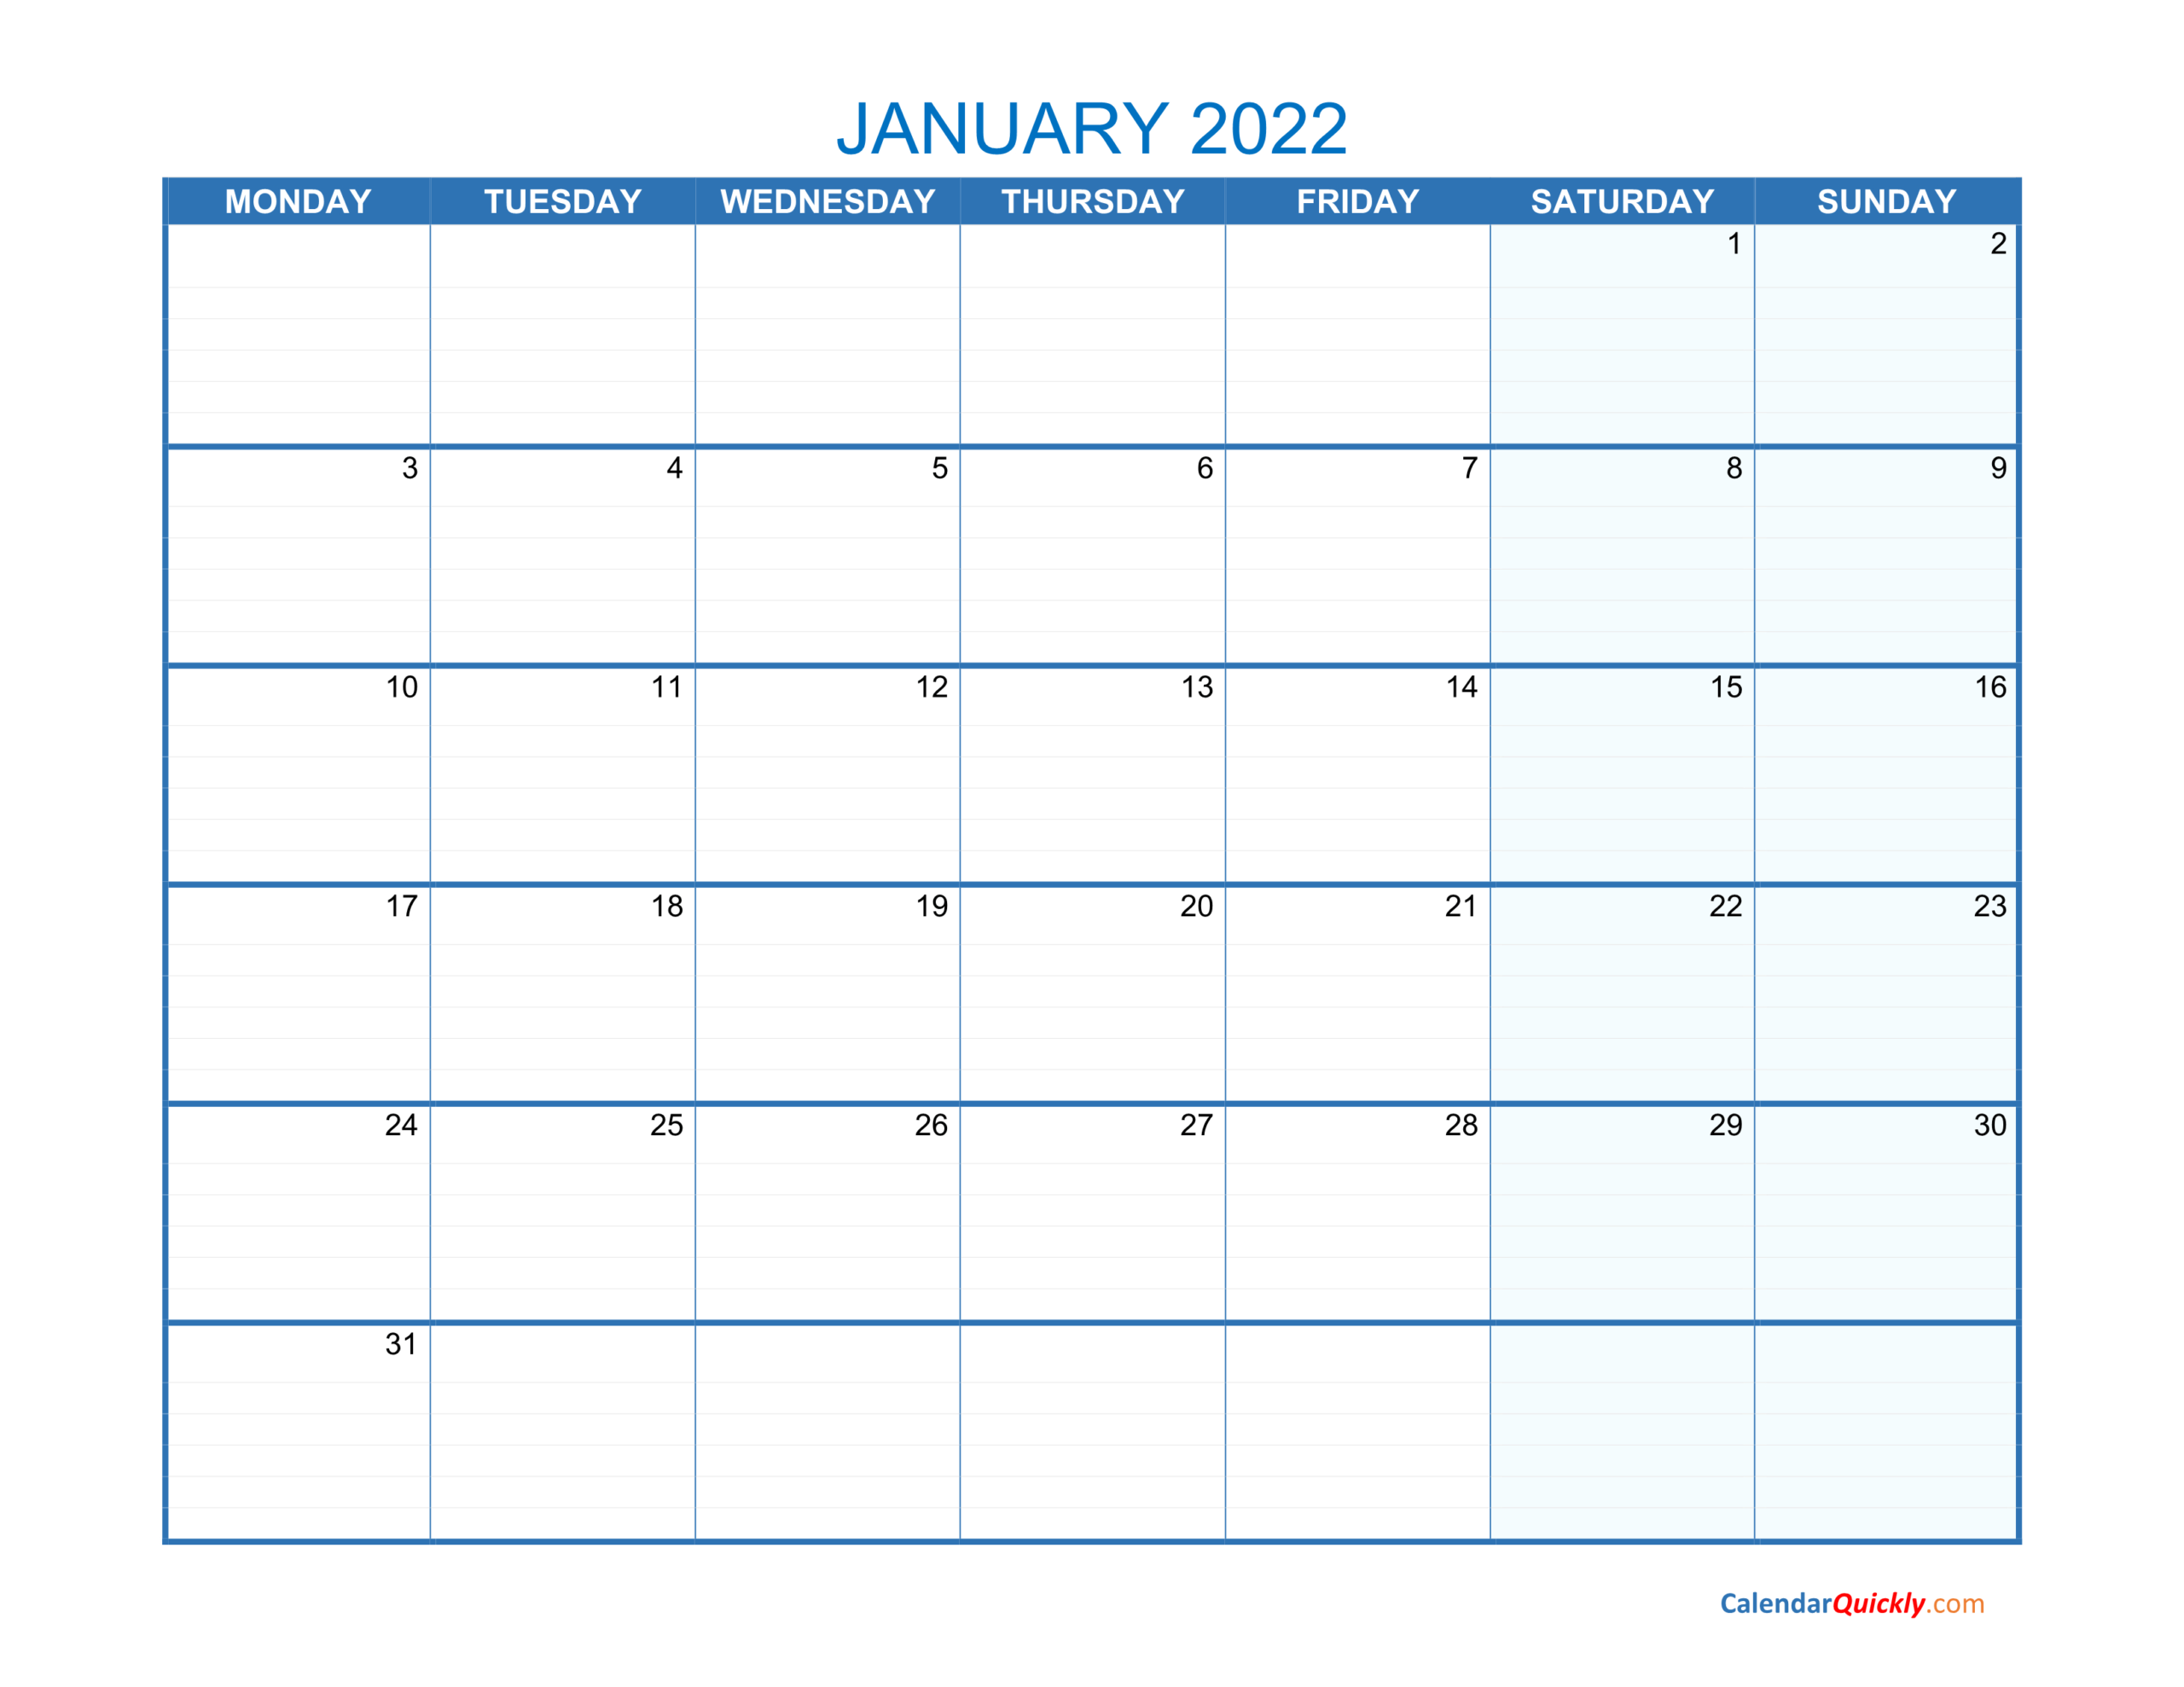 Catch Calendar For 2022 In January